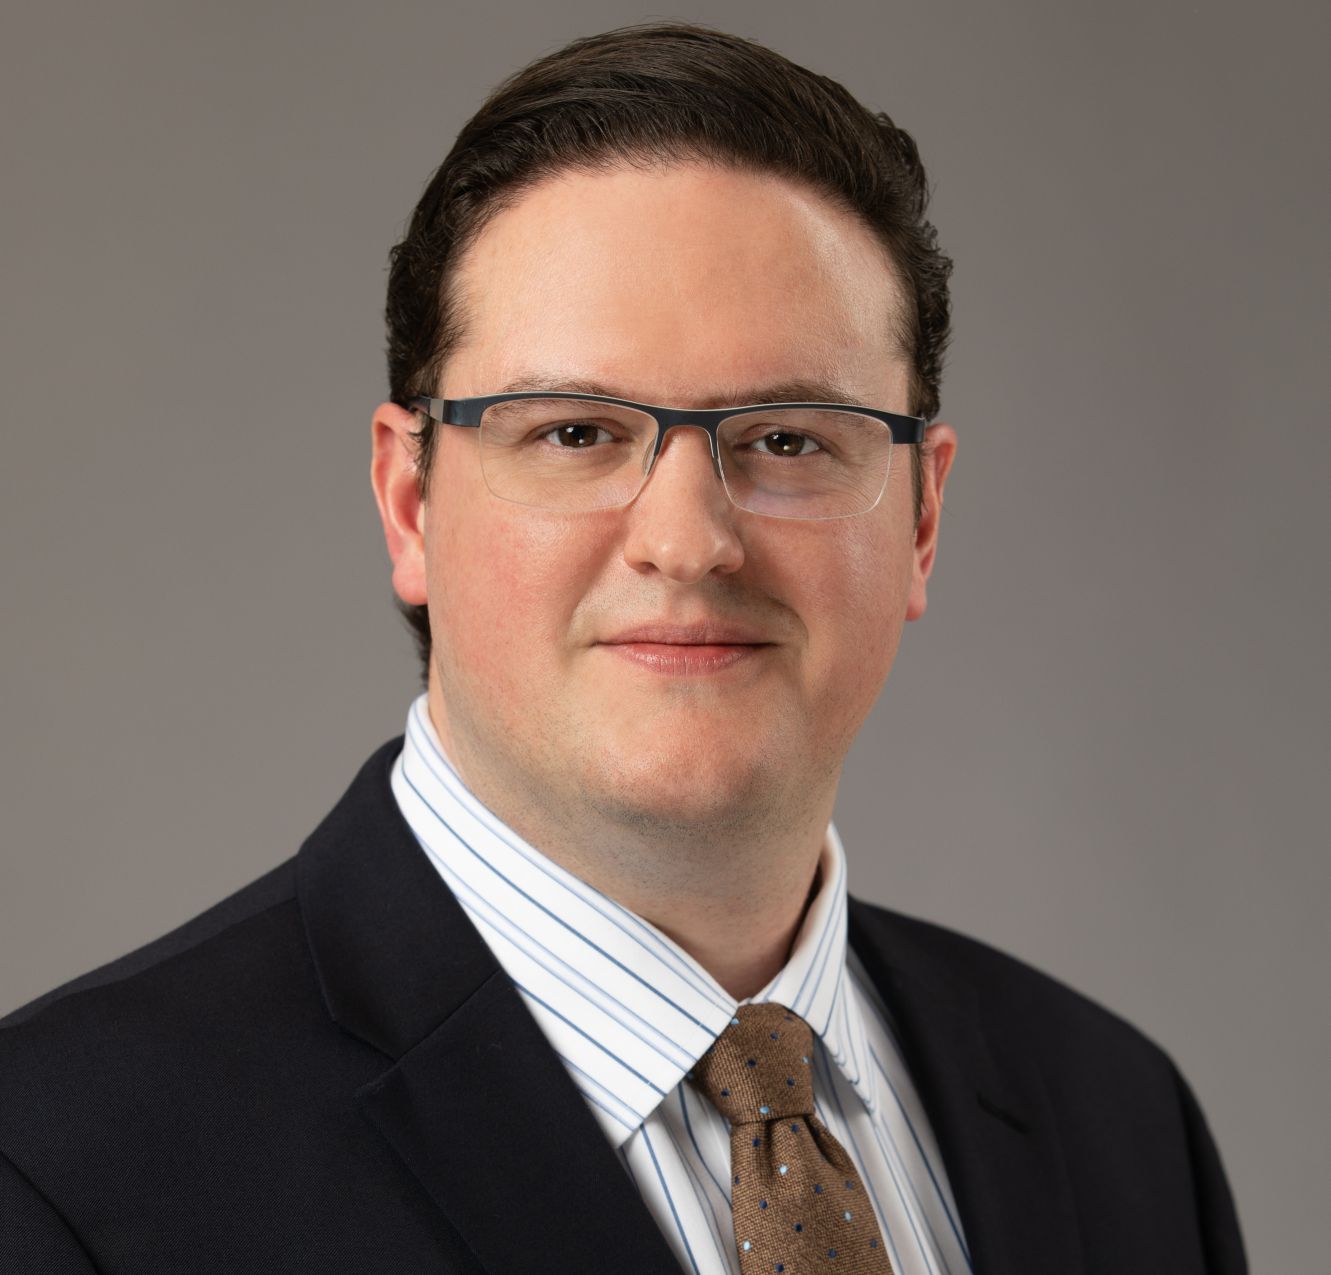 Headshot for small business and startup attorney, Jeffrey R. Pote, in a navy suit and brown tie in front of a gray background